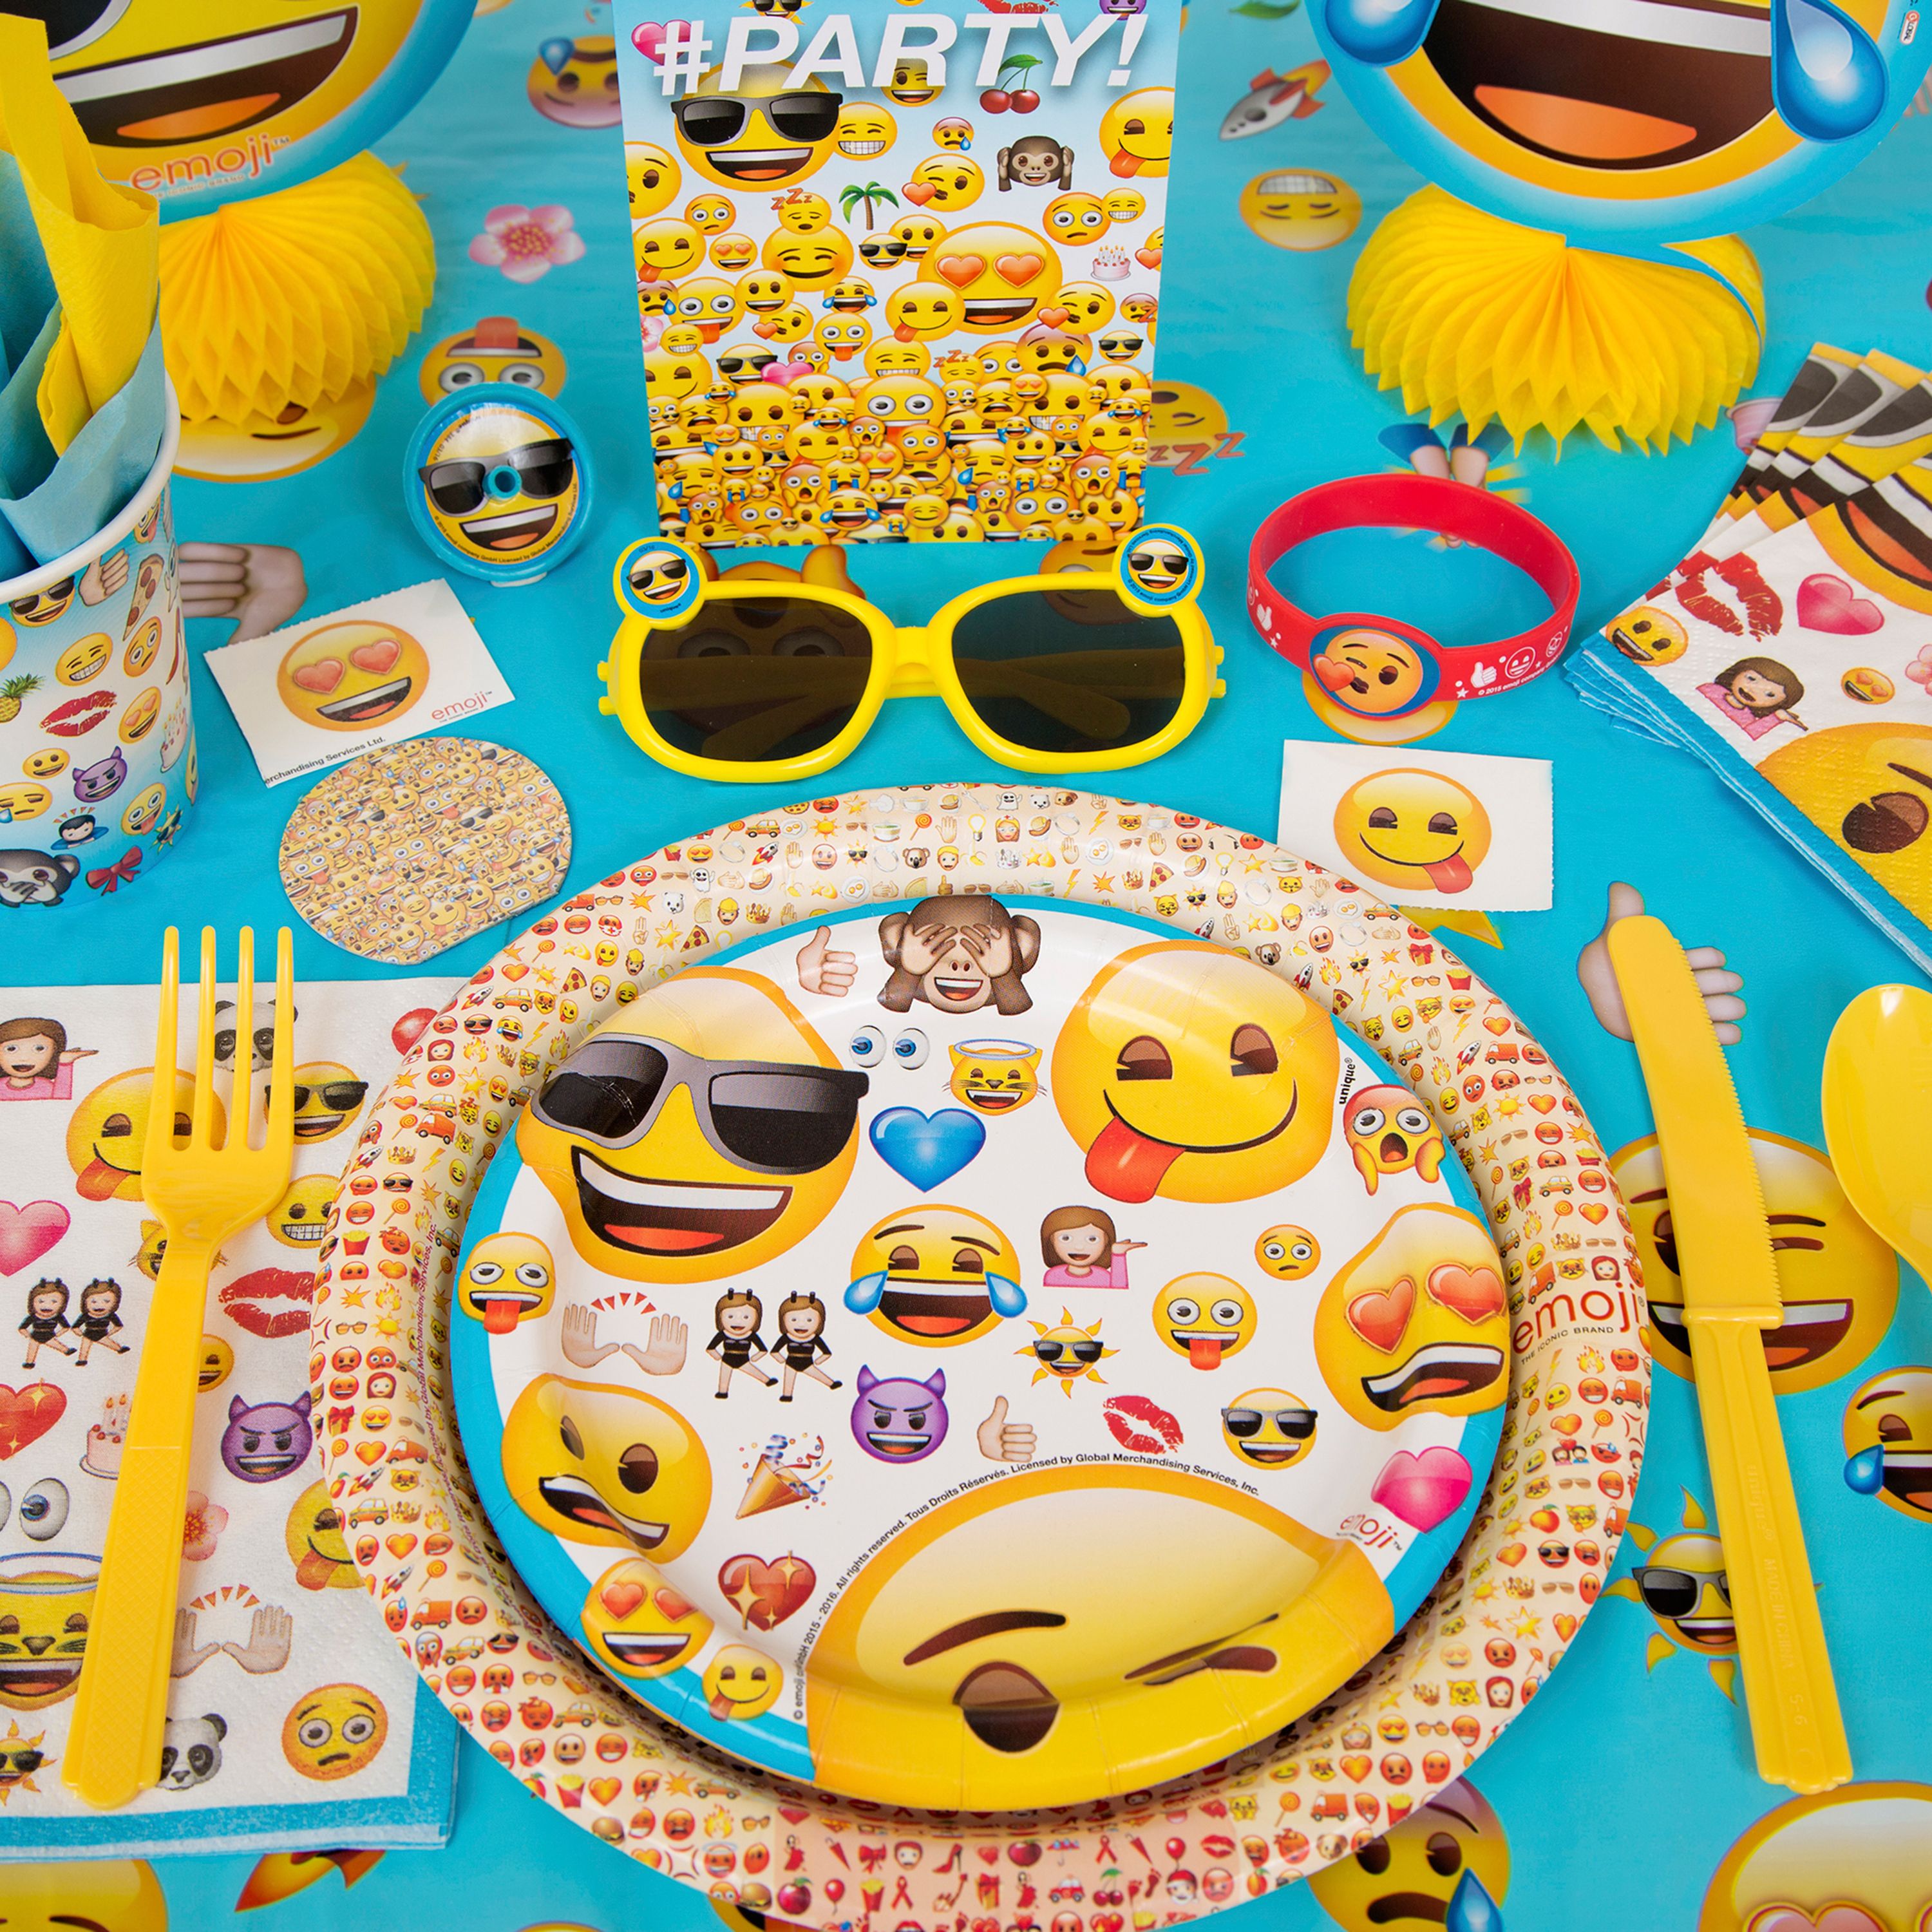 Unique Industries Emoji Birthday Party Bags, 8 Count - image 3 of 3